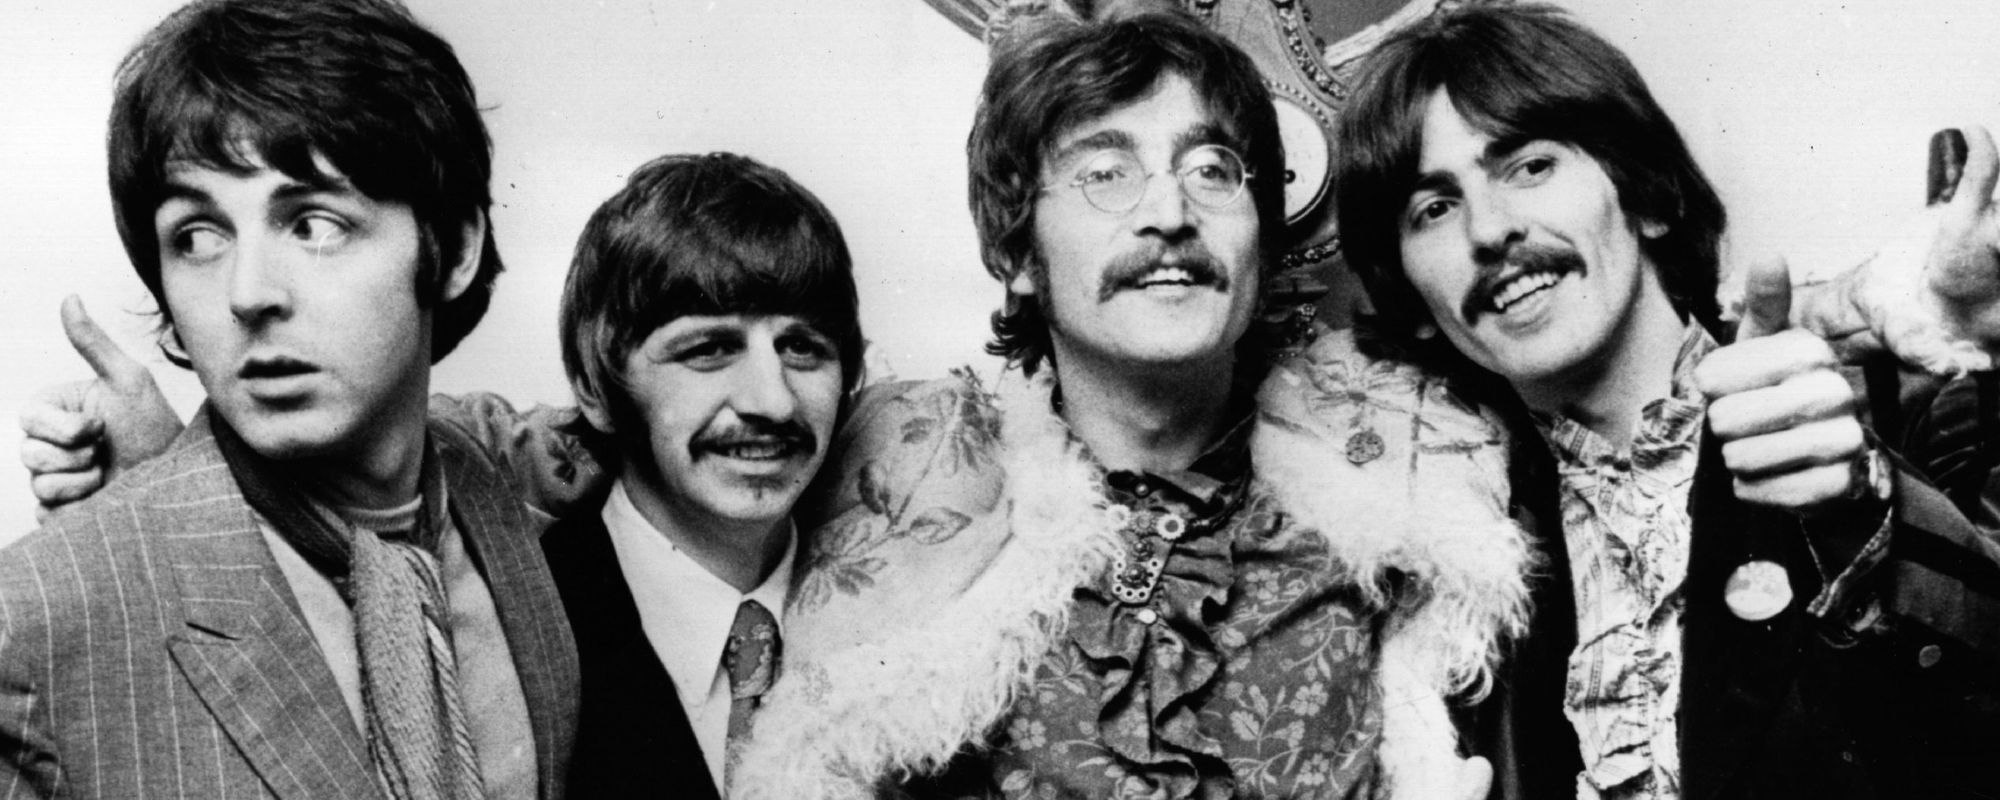 3 Songs That Were Scrapped by the Beatles but Became Hits in Their Solo Careers